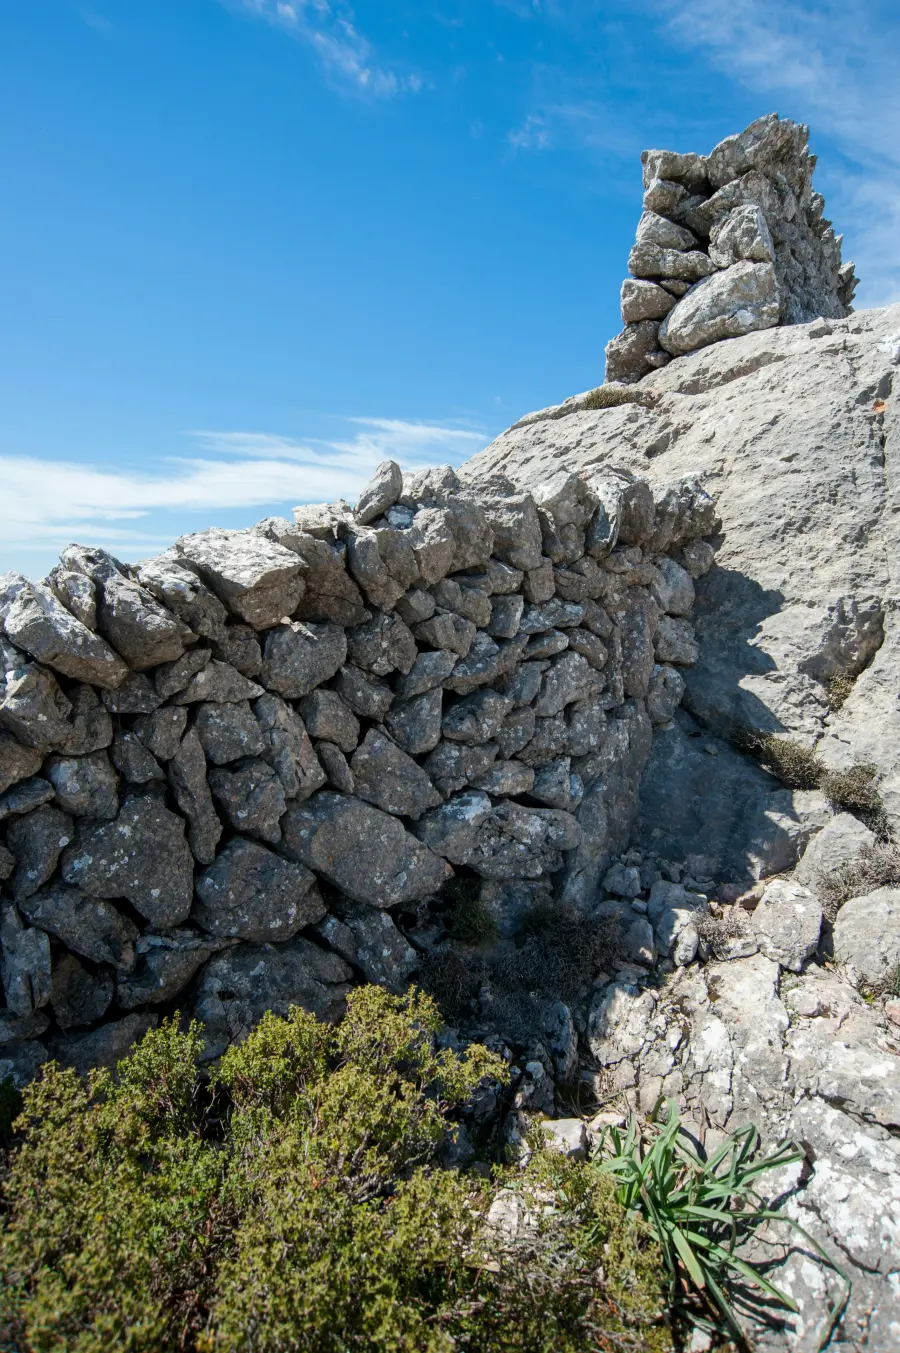 A traditional dry stone wall against a rocky outcrop under a clear blue sky, showcasing the rugged natural landscape of Murter Island